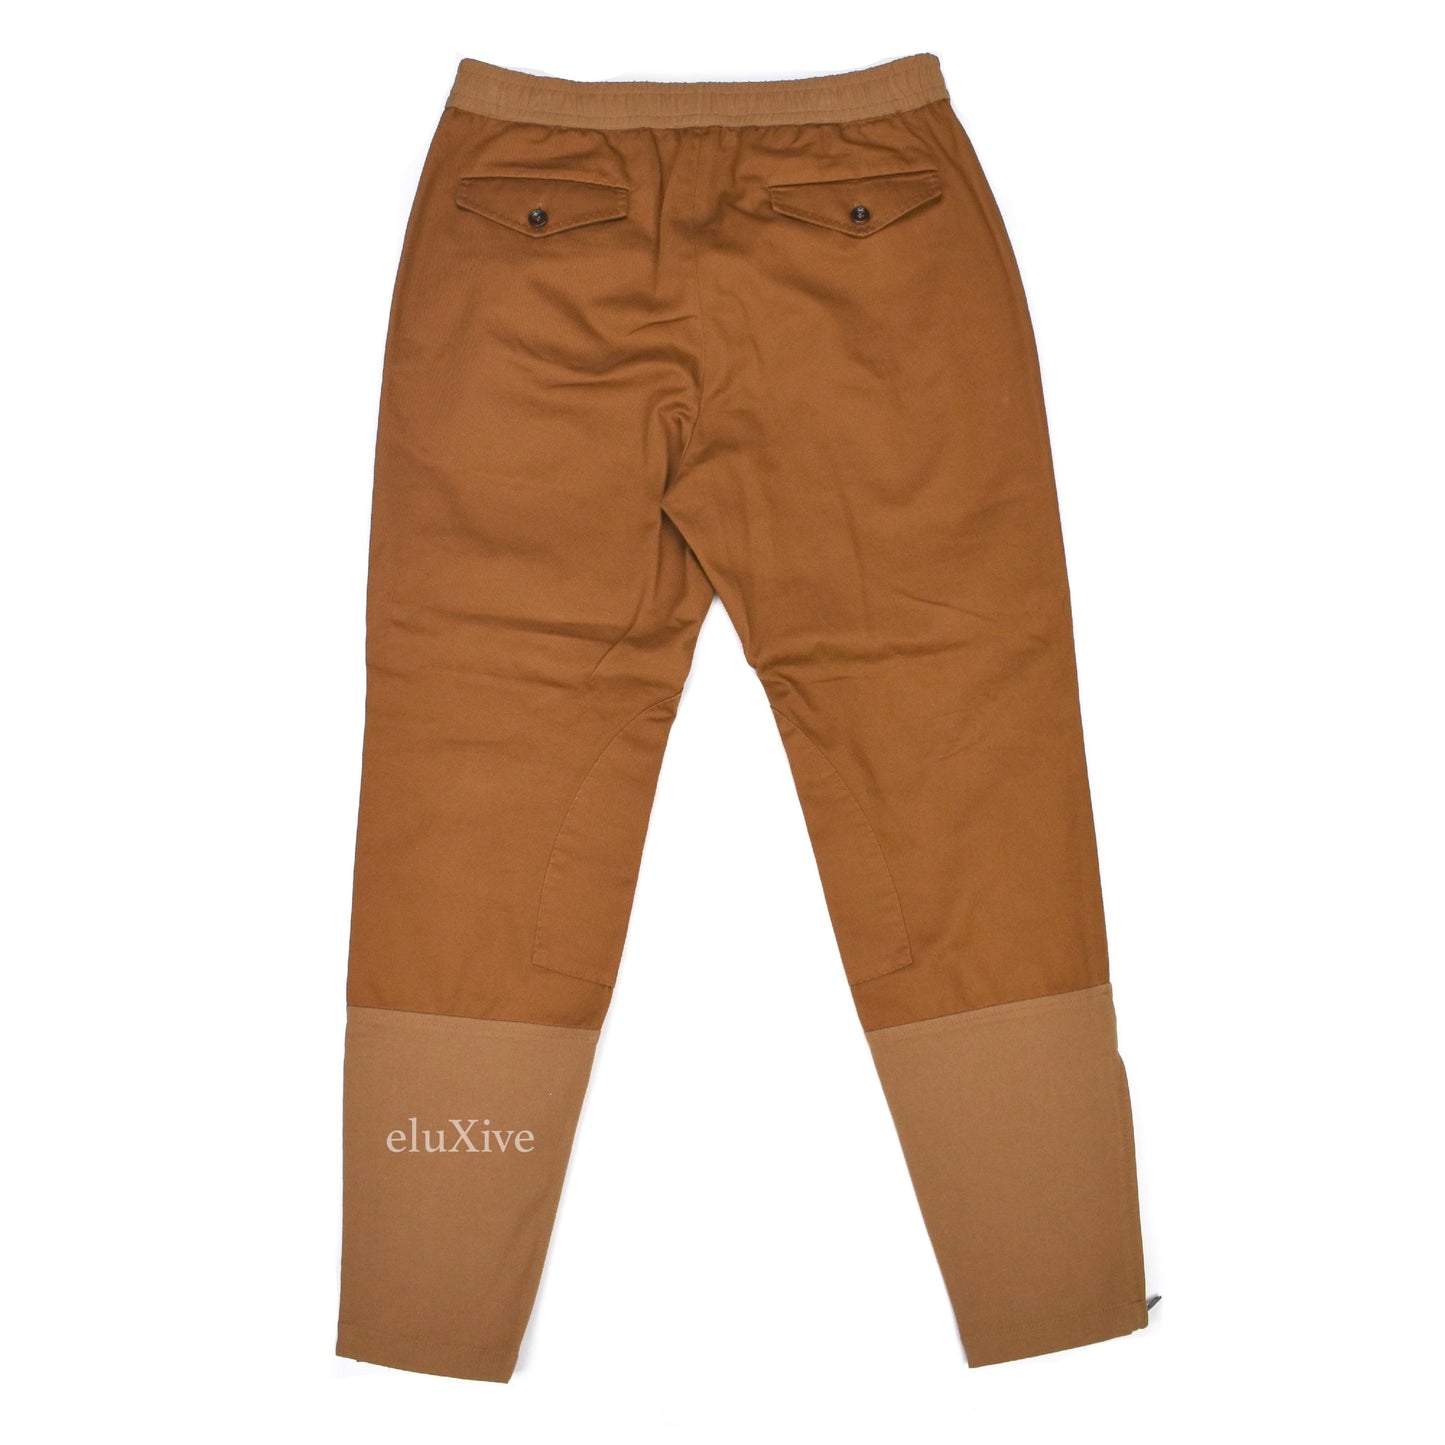 Gucci - Brown/Beige Twill Riding Pants